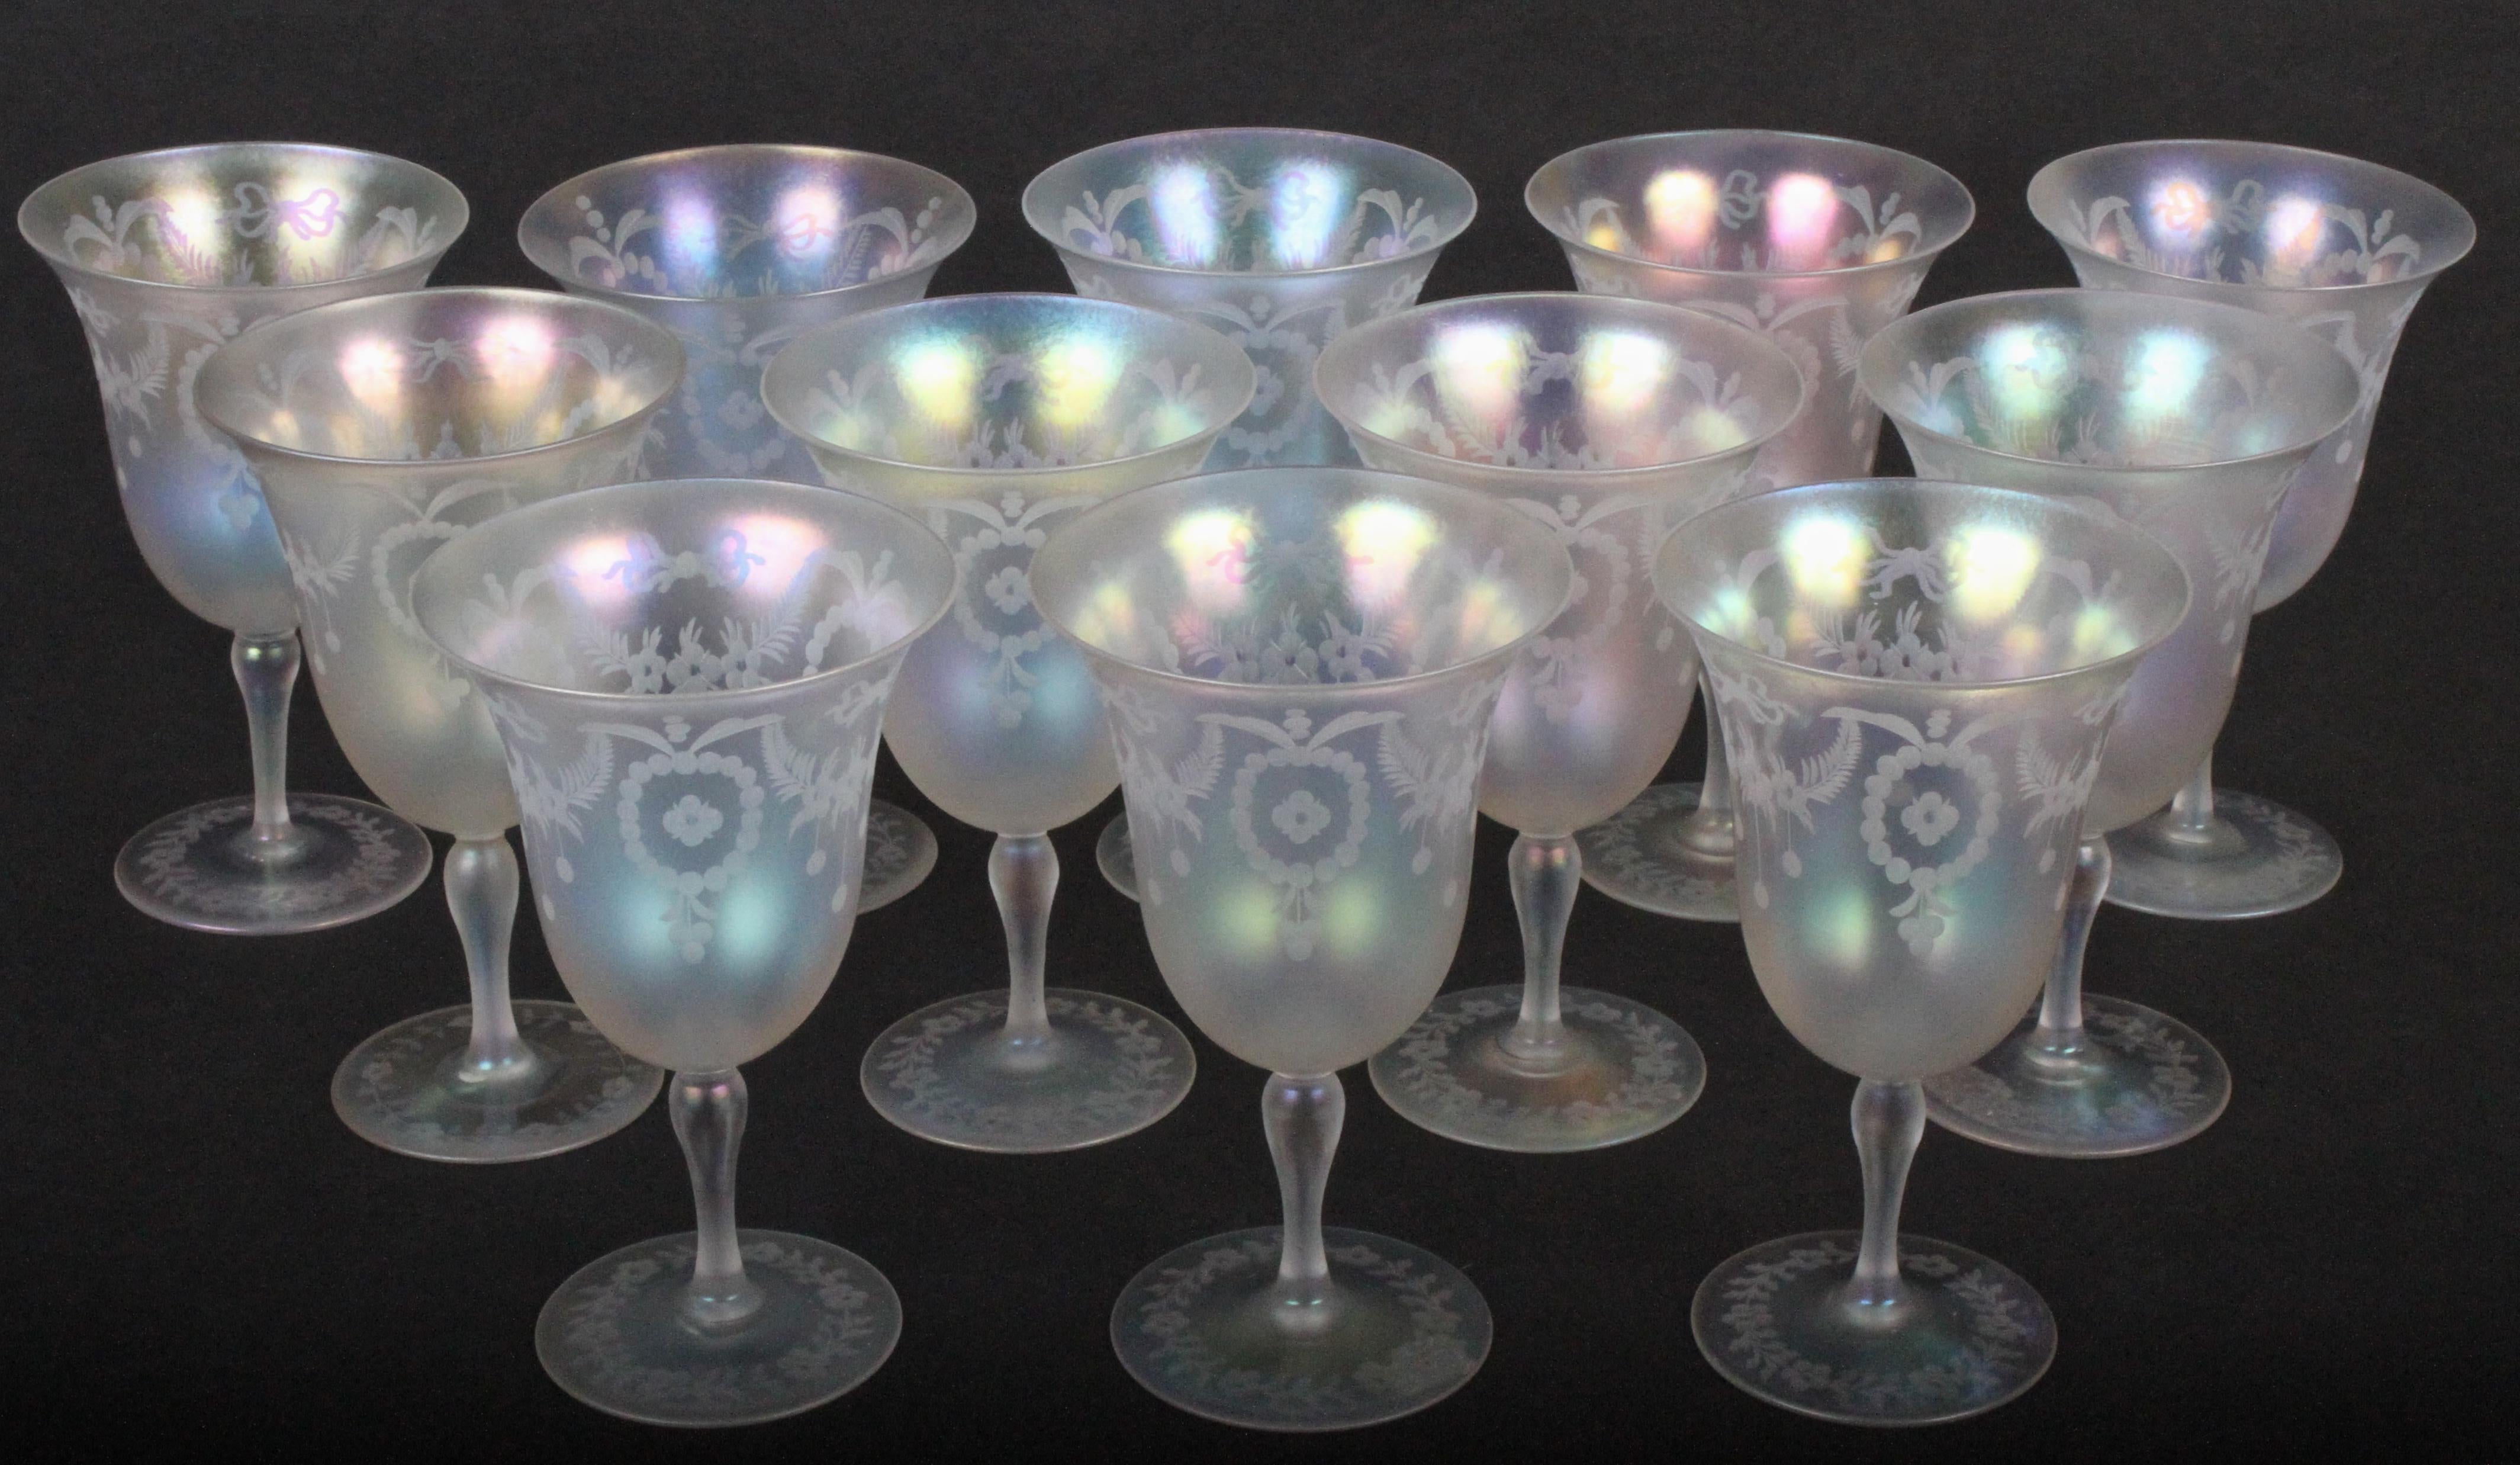 This set of 12 Steuben verre de soie goblets and water pitcher is both beautiful and exceedingly rare. The set features 12 goblets and a pitcher, all etched by the T.J Hawkes Company in the Adam style pattern known as 